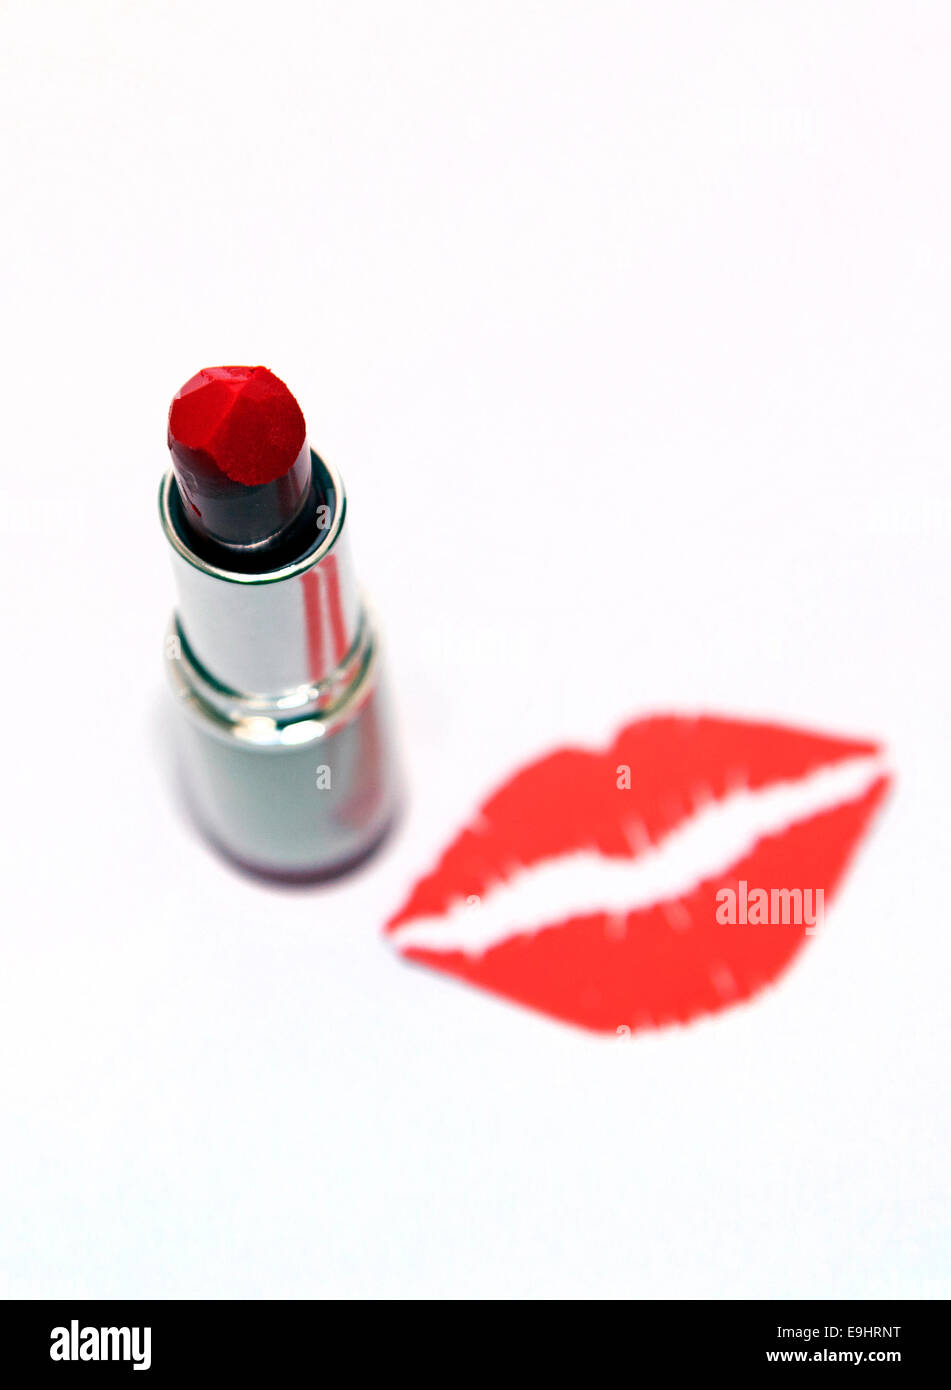 Red lipstick and printed kiss, London Stock Photo